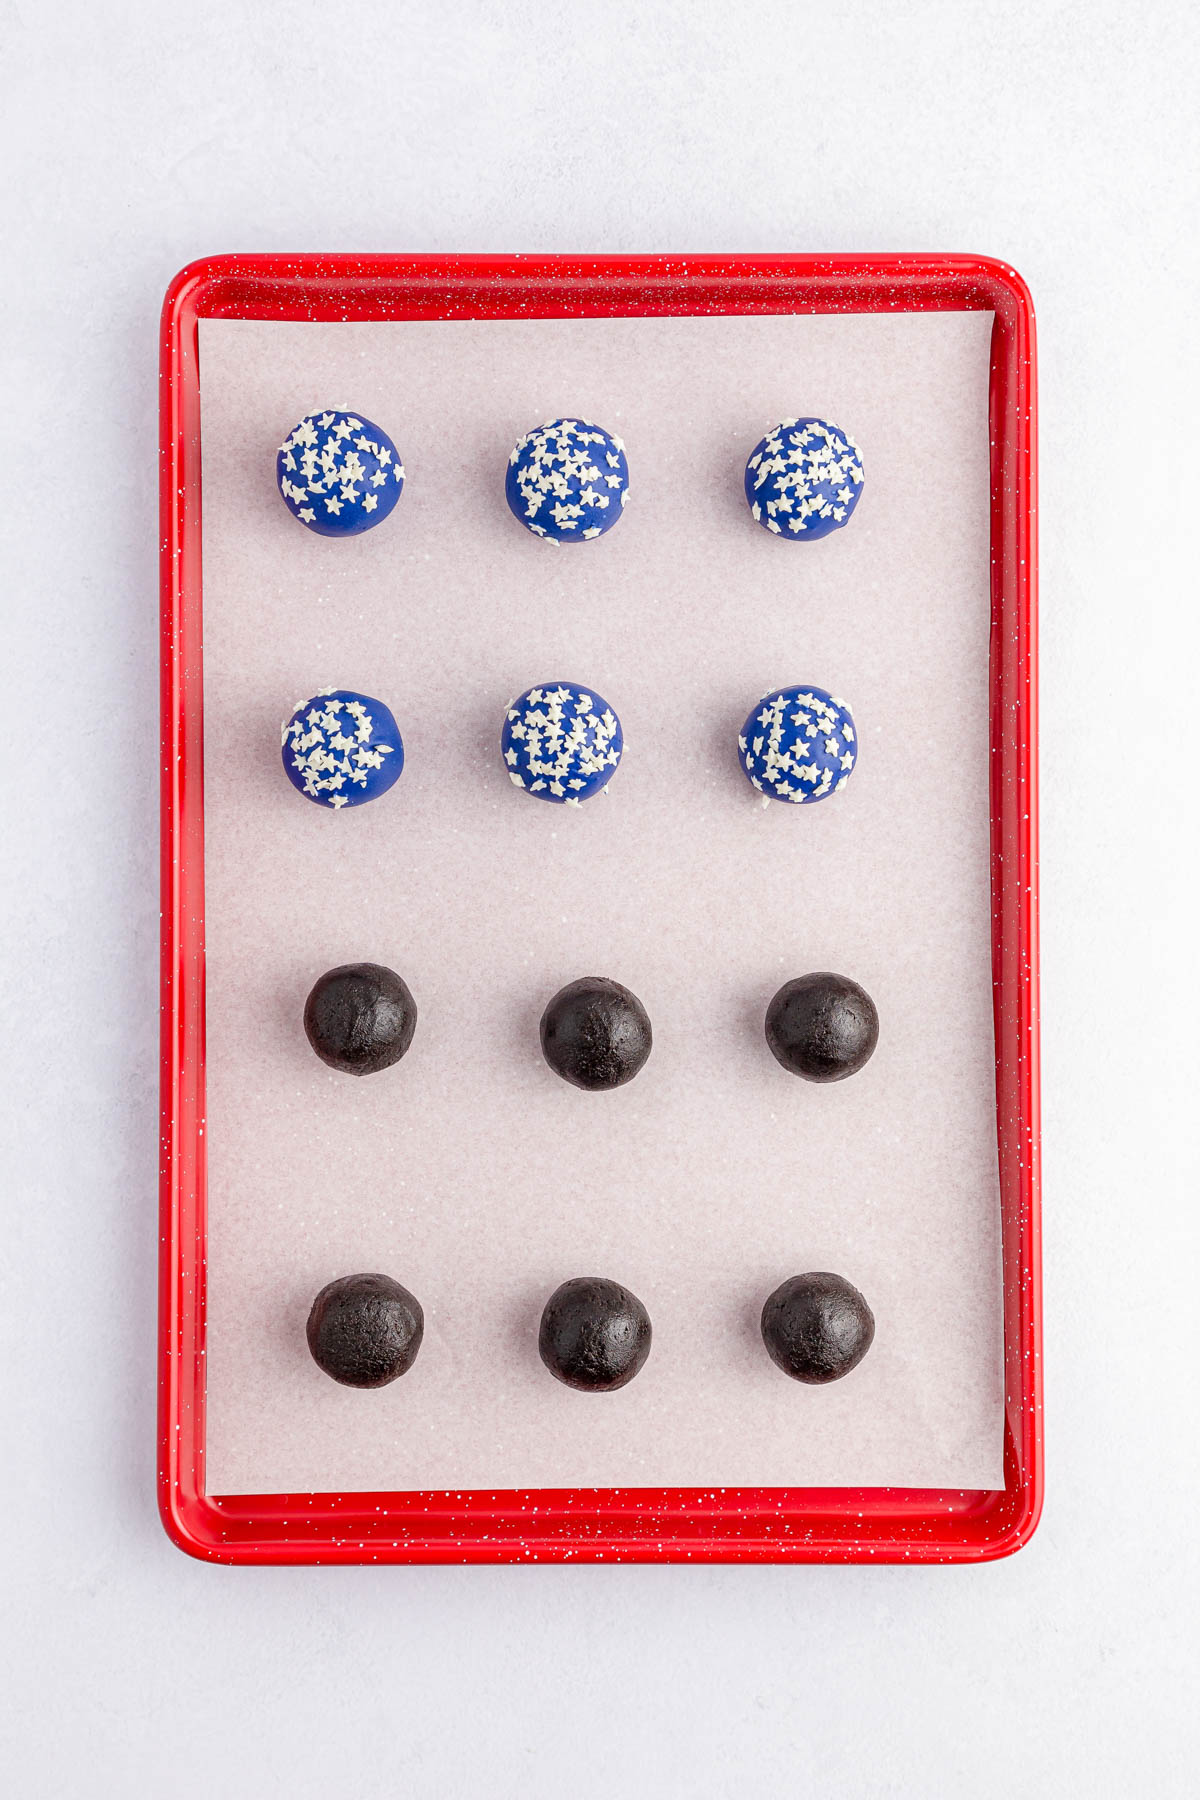 Oreo balls on baking sheet plain and with blue chocolate and stars